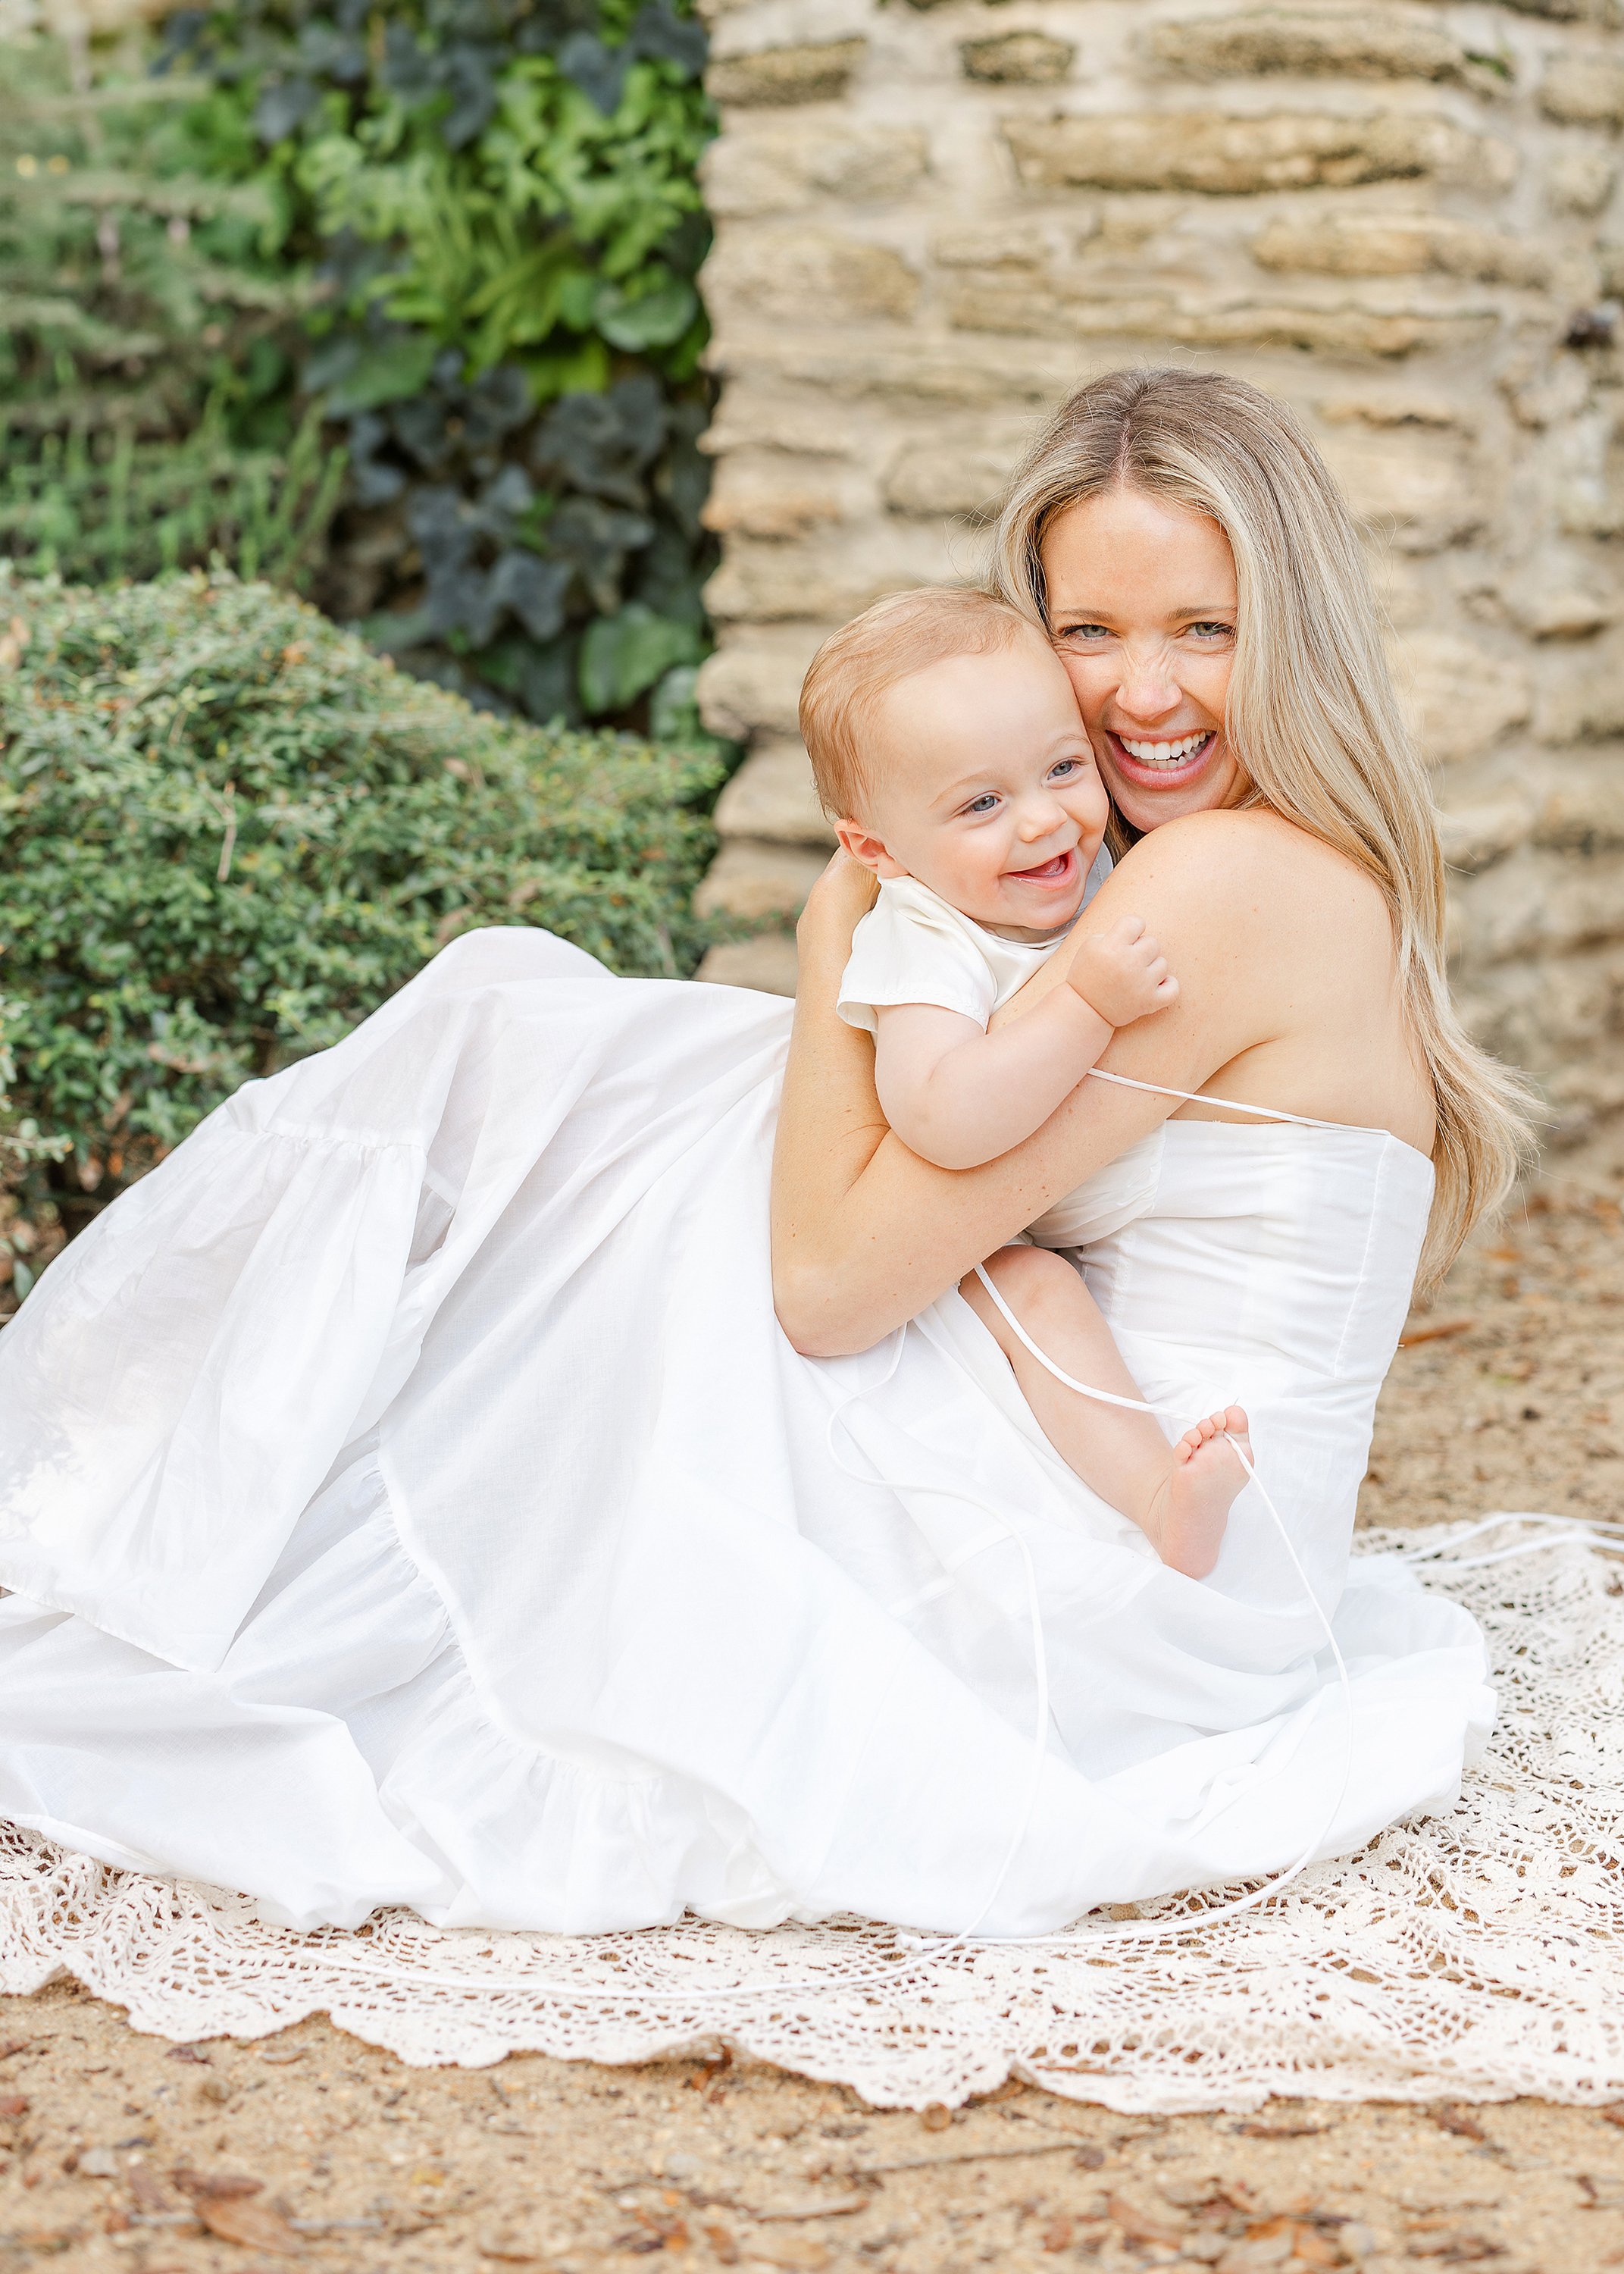 An airy springtime portrait of a mother in a white dress holding her baby boy.